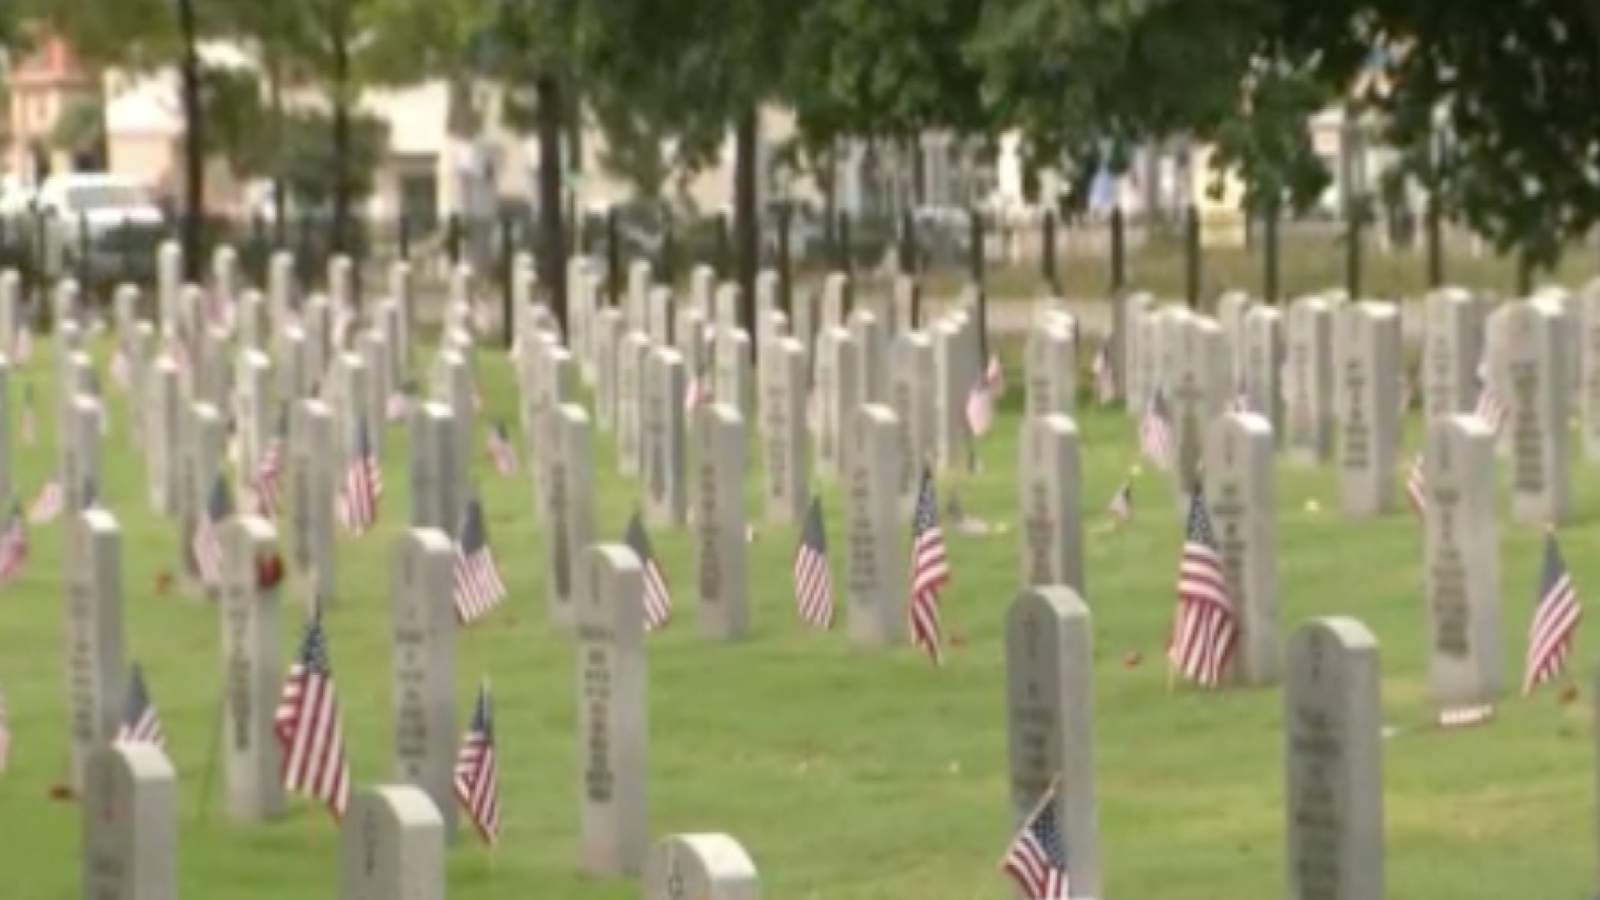 True meaning of Memorial Day remembered at Houston National Cemetery